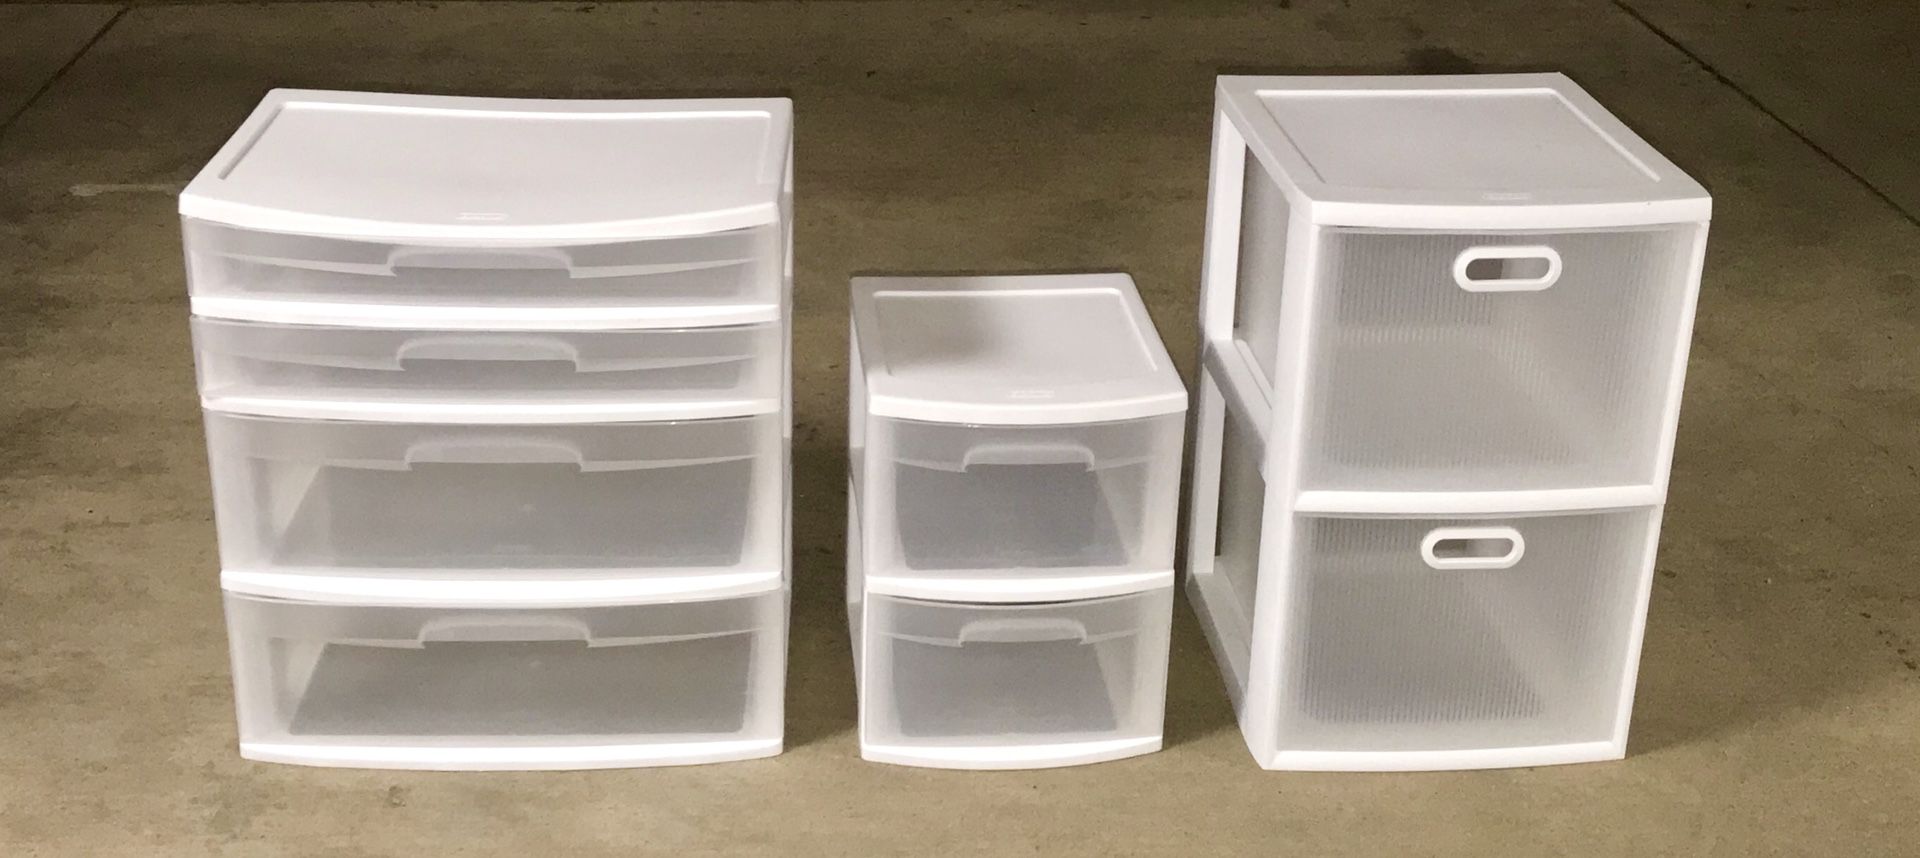 3 White and Clear Storage Drawers ($30 for all)